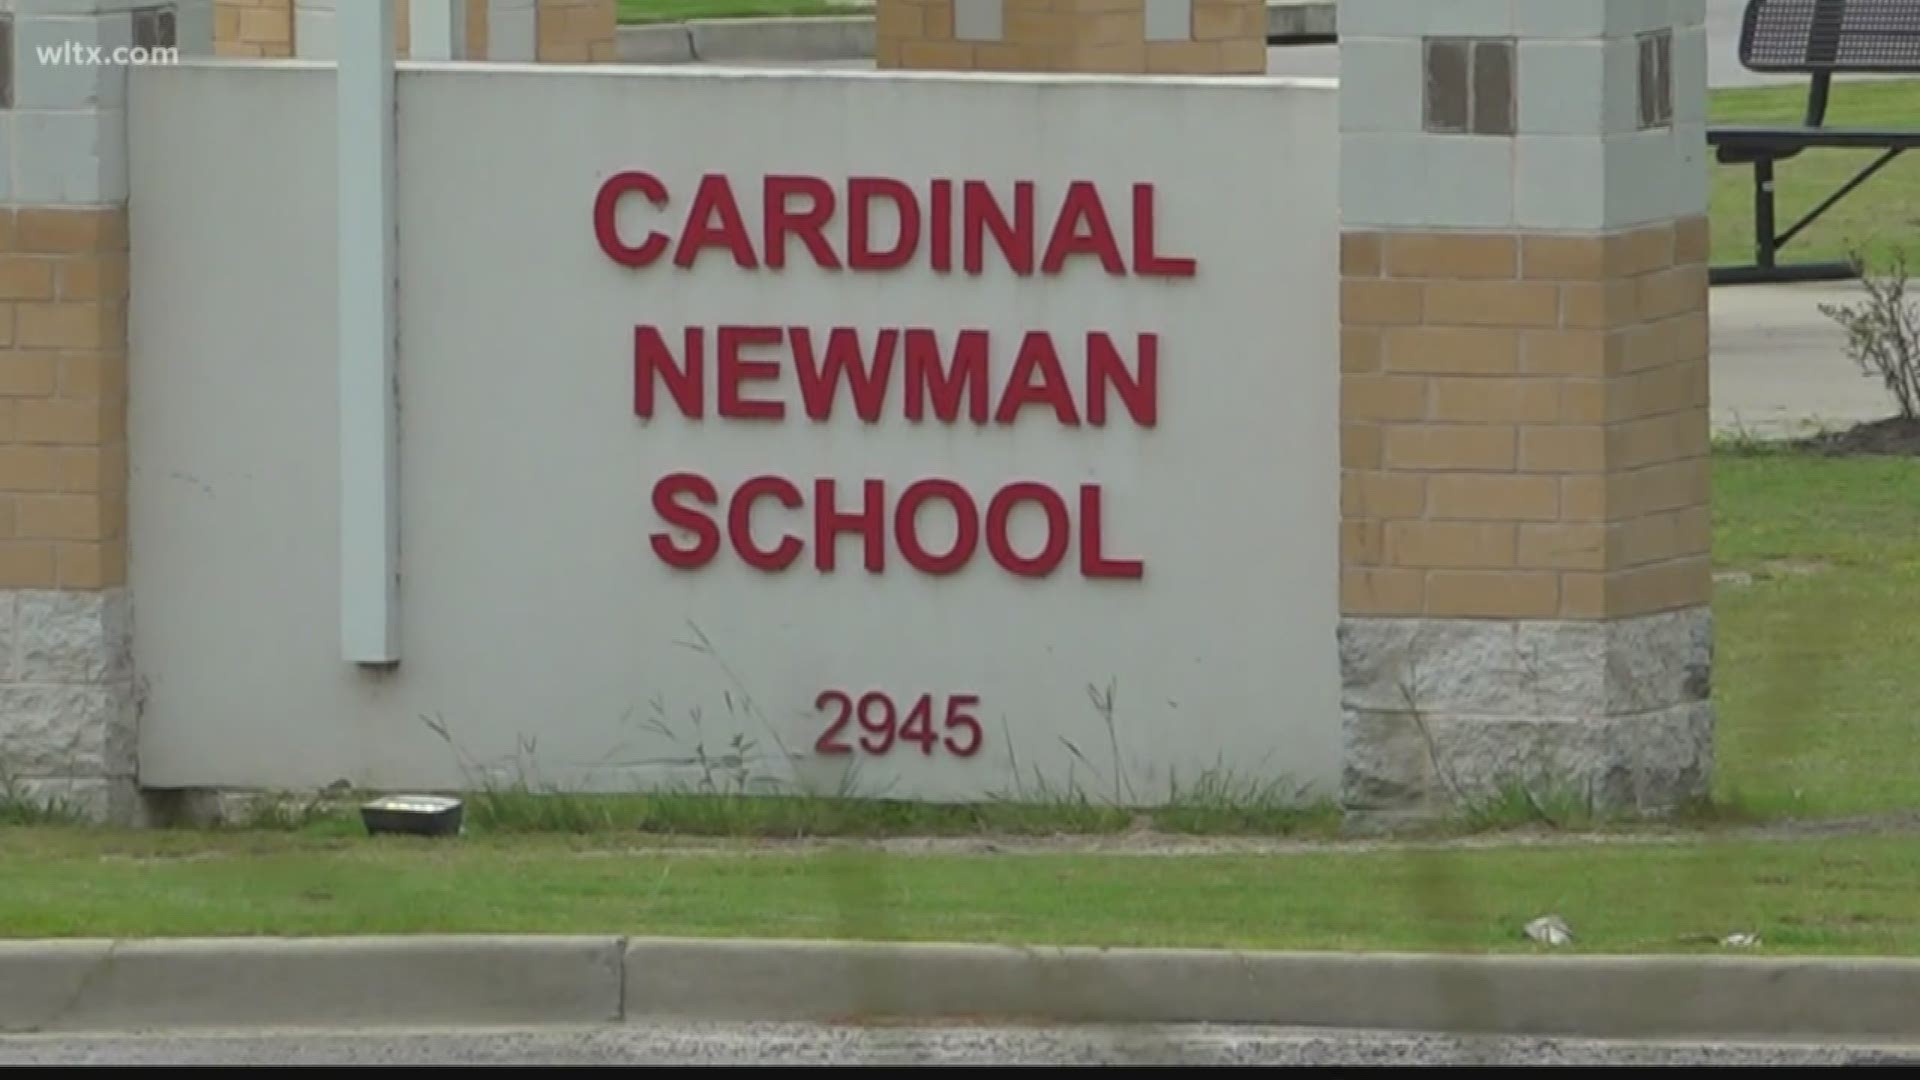 Parents say they met with the principal of Cardinal Newman School to talk about their concerns and how the school handled a student who made threats against the school.